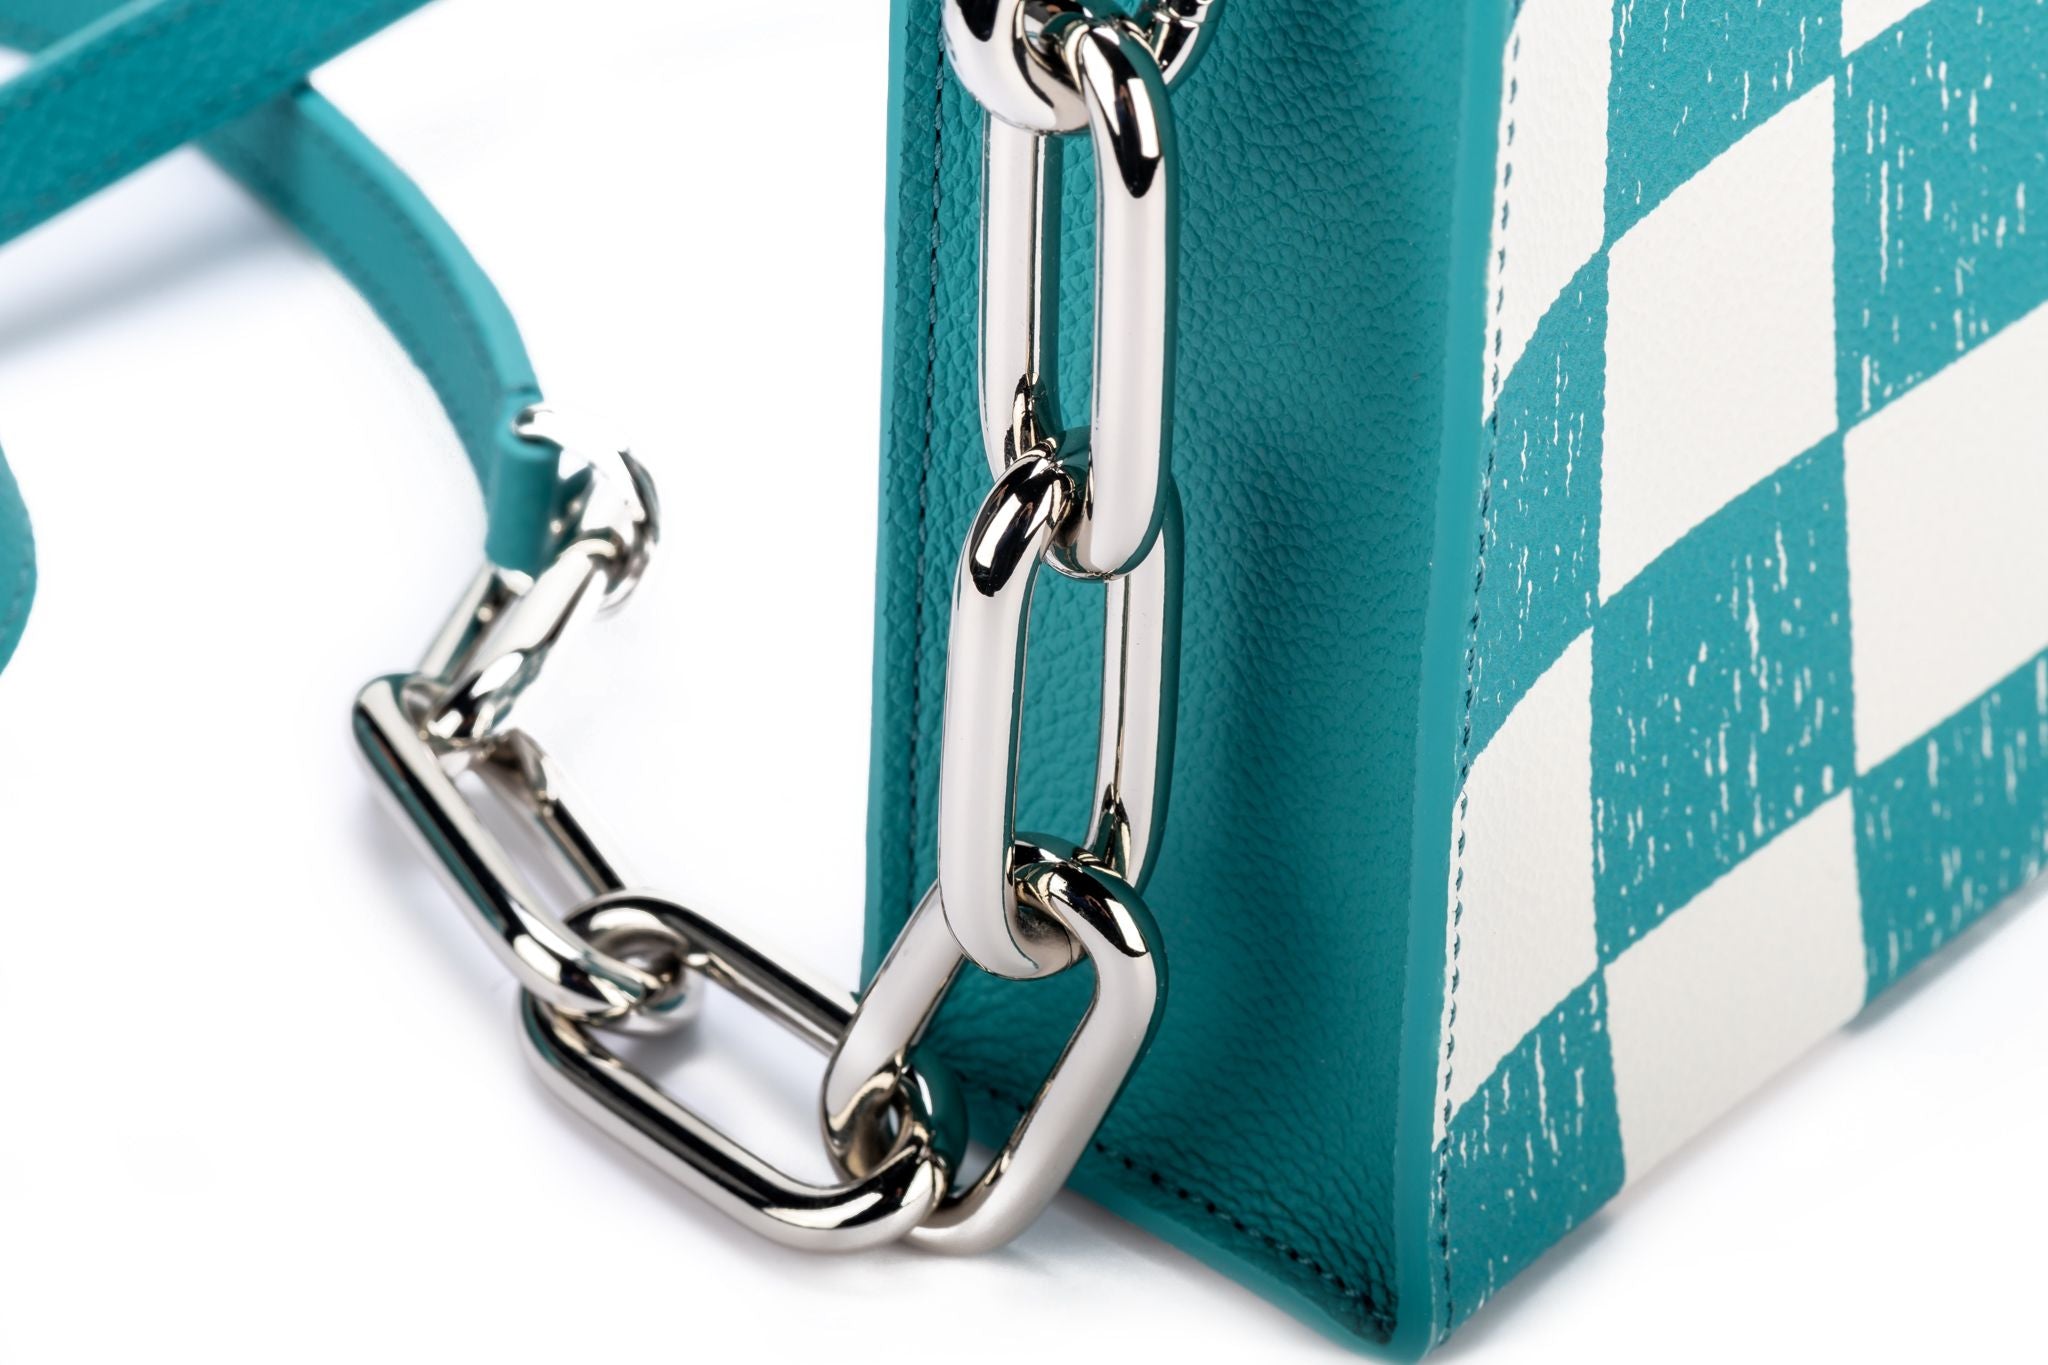 Louis Vuitton Virgil Abloh Teal And White Damier Leather Marque